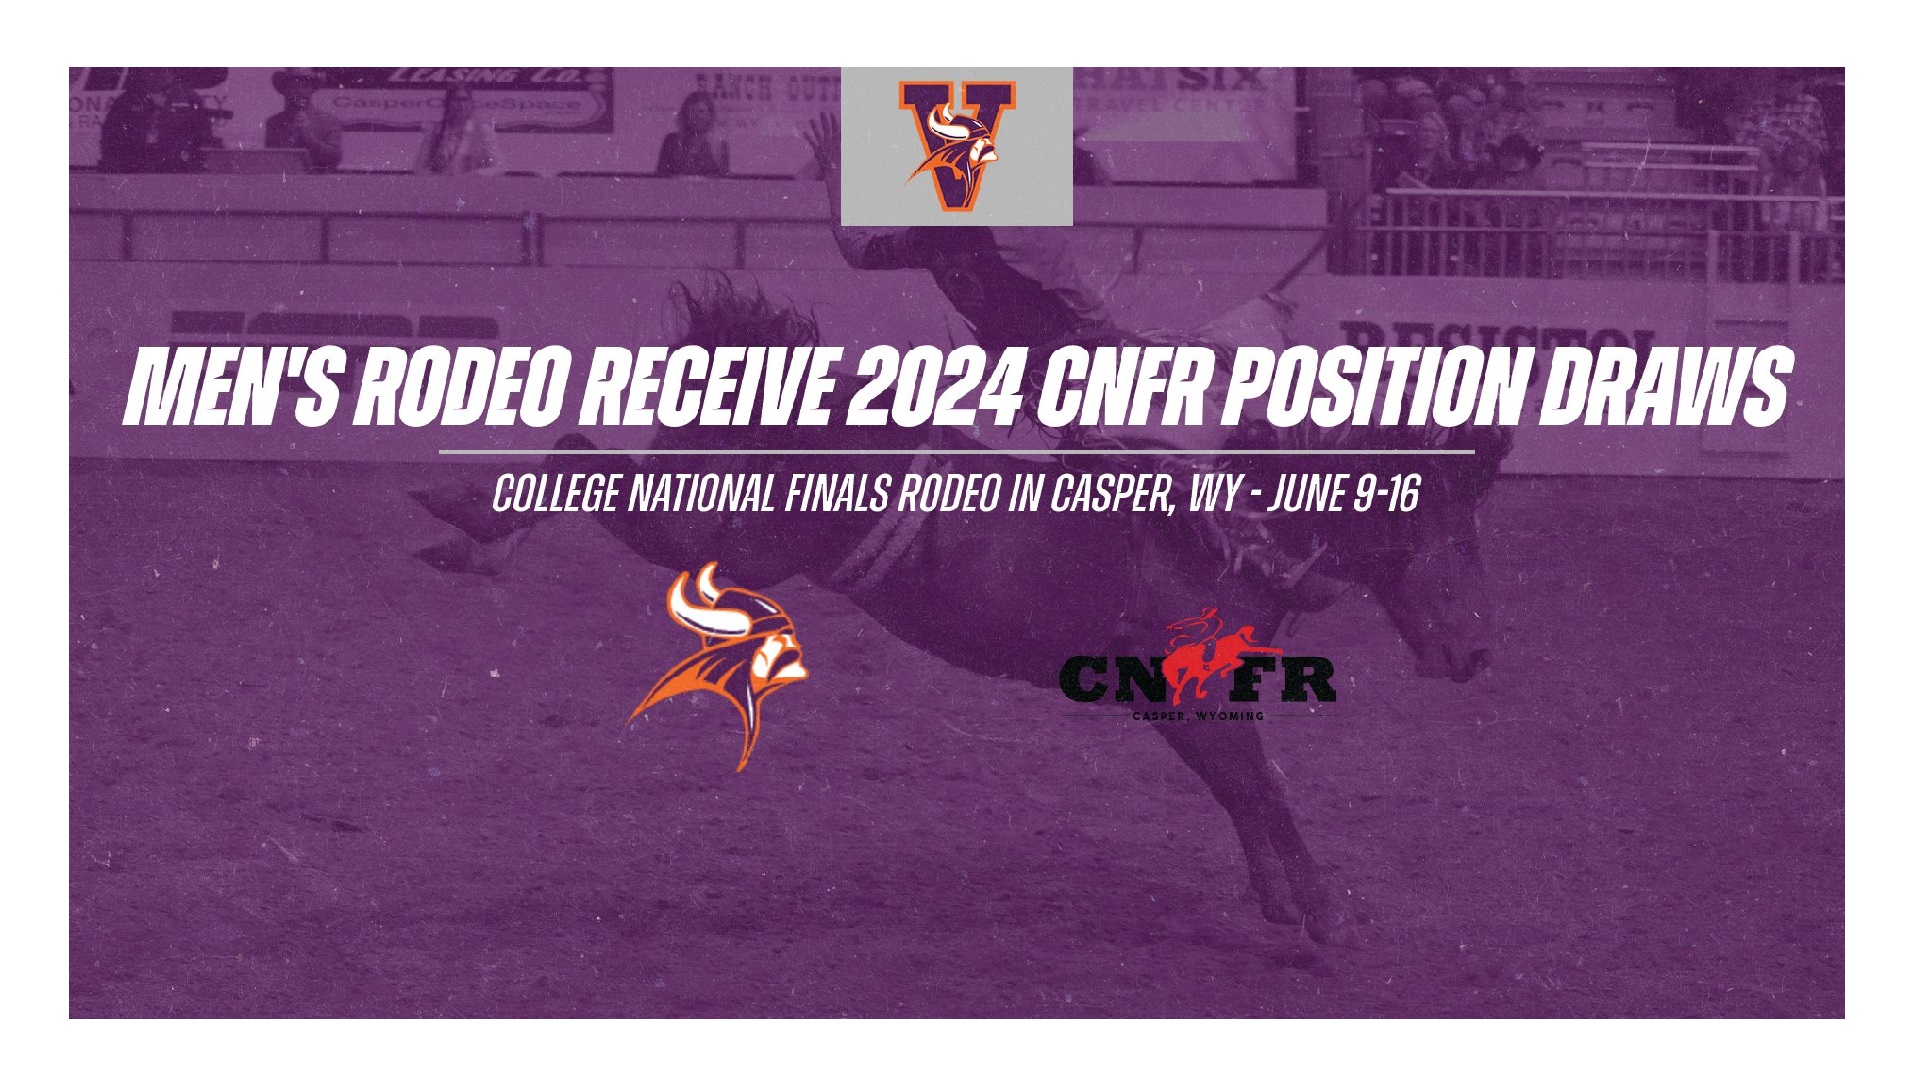 Men's Rodeo Receive Position Draws for 2024 CNFR